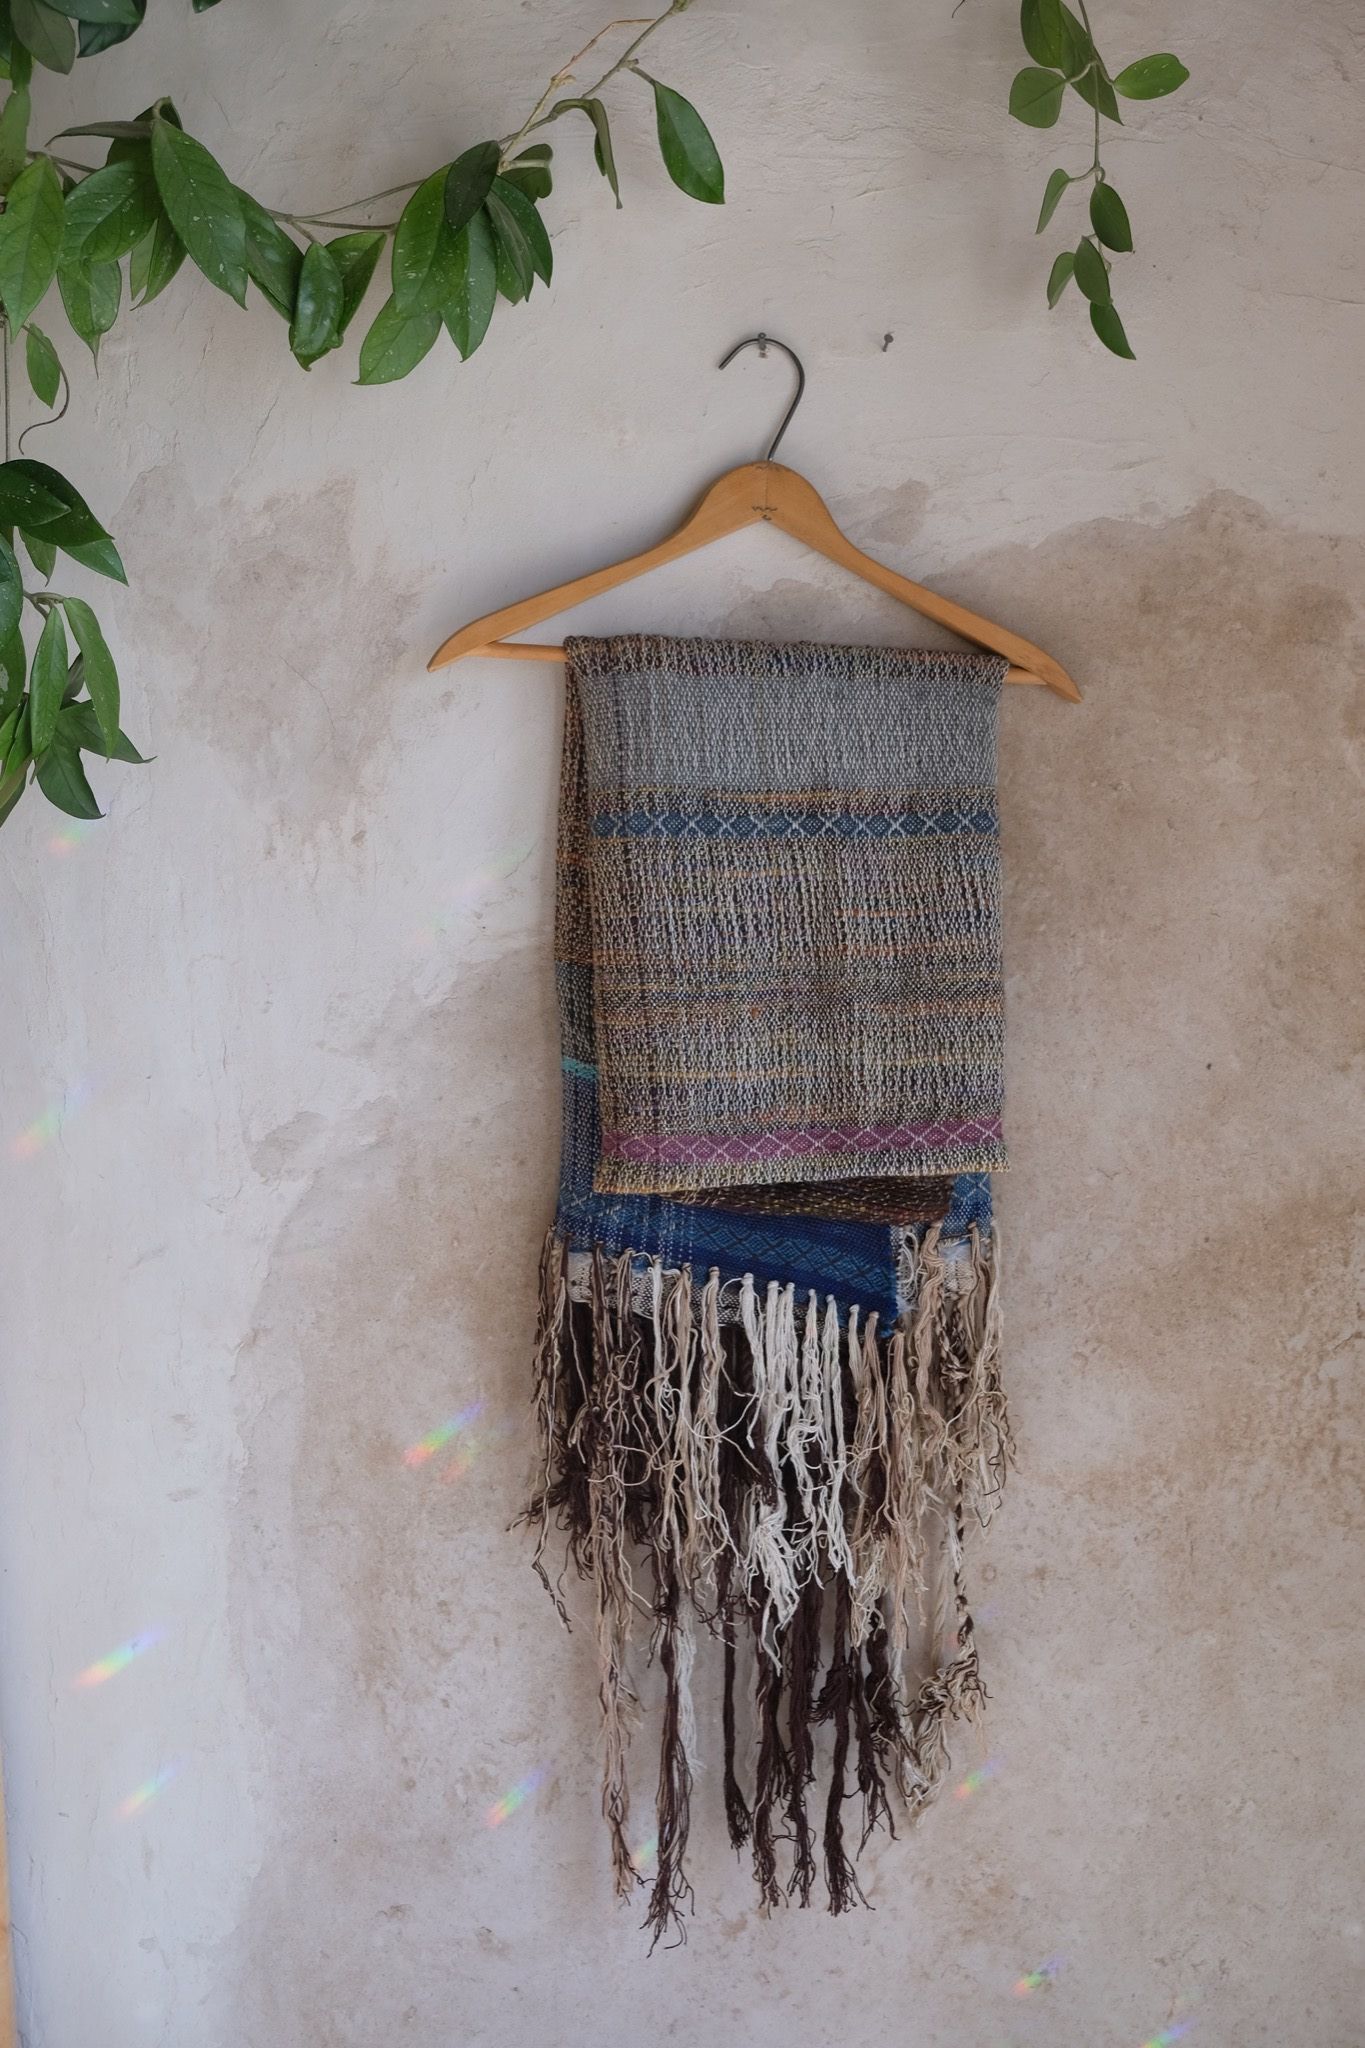 Blue, white and brown handwoven scarf on a hanger hanging on a white mud wall.